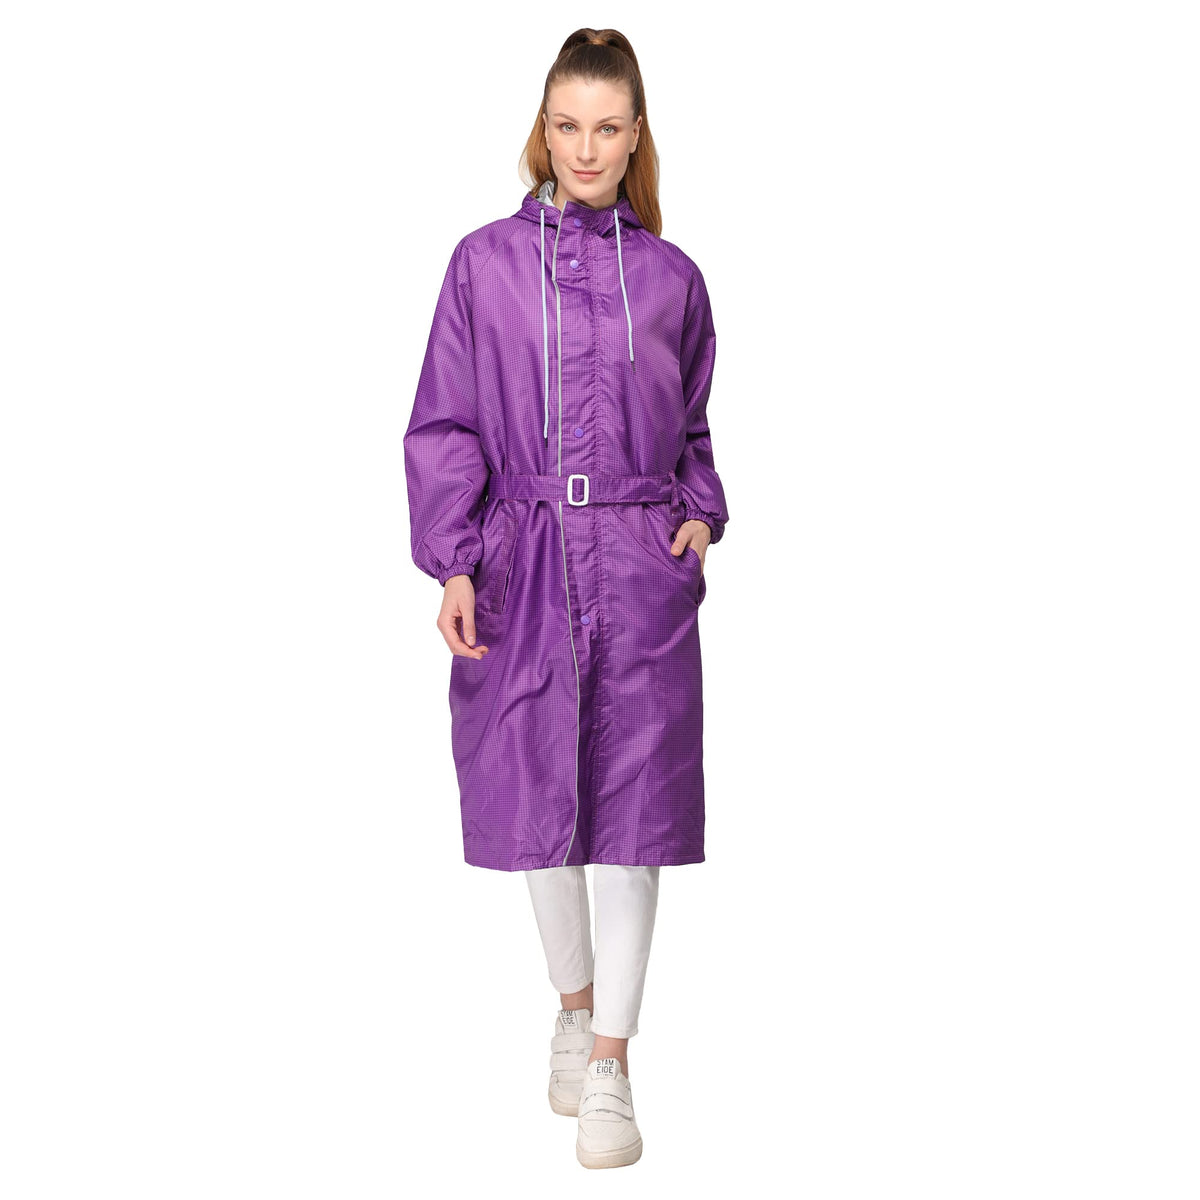 The Clownfish by STRAUSS Raincoats for Women Waterproof Reversible Double Layer. Brilliant Pro Series (Purple, X-Large)